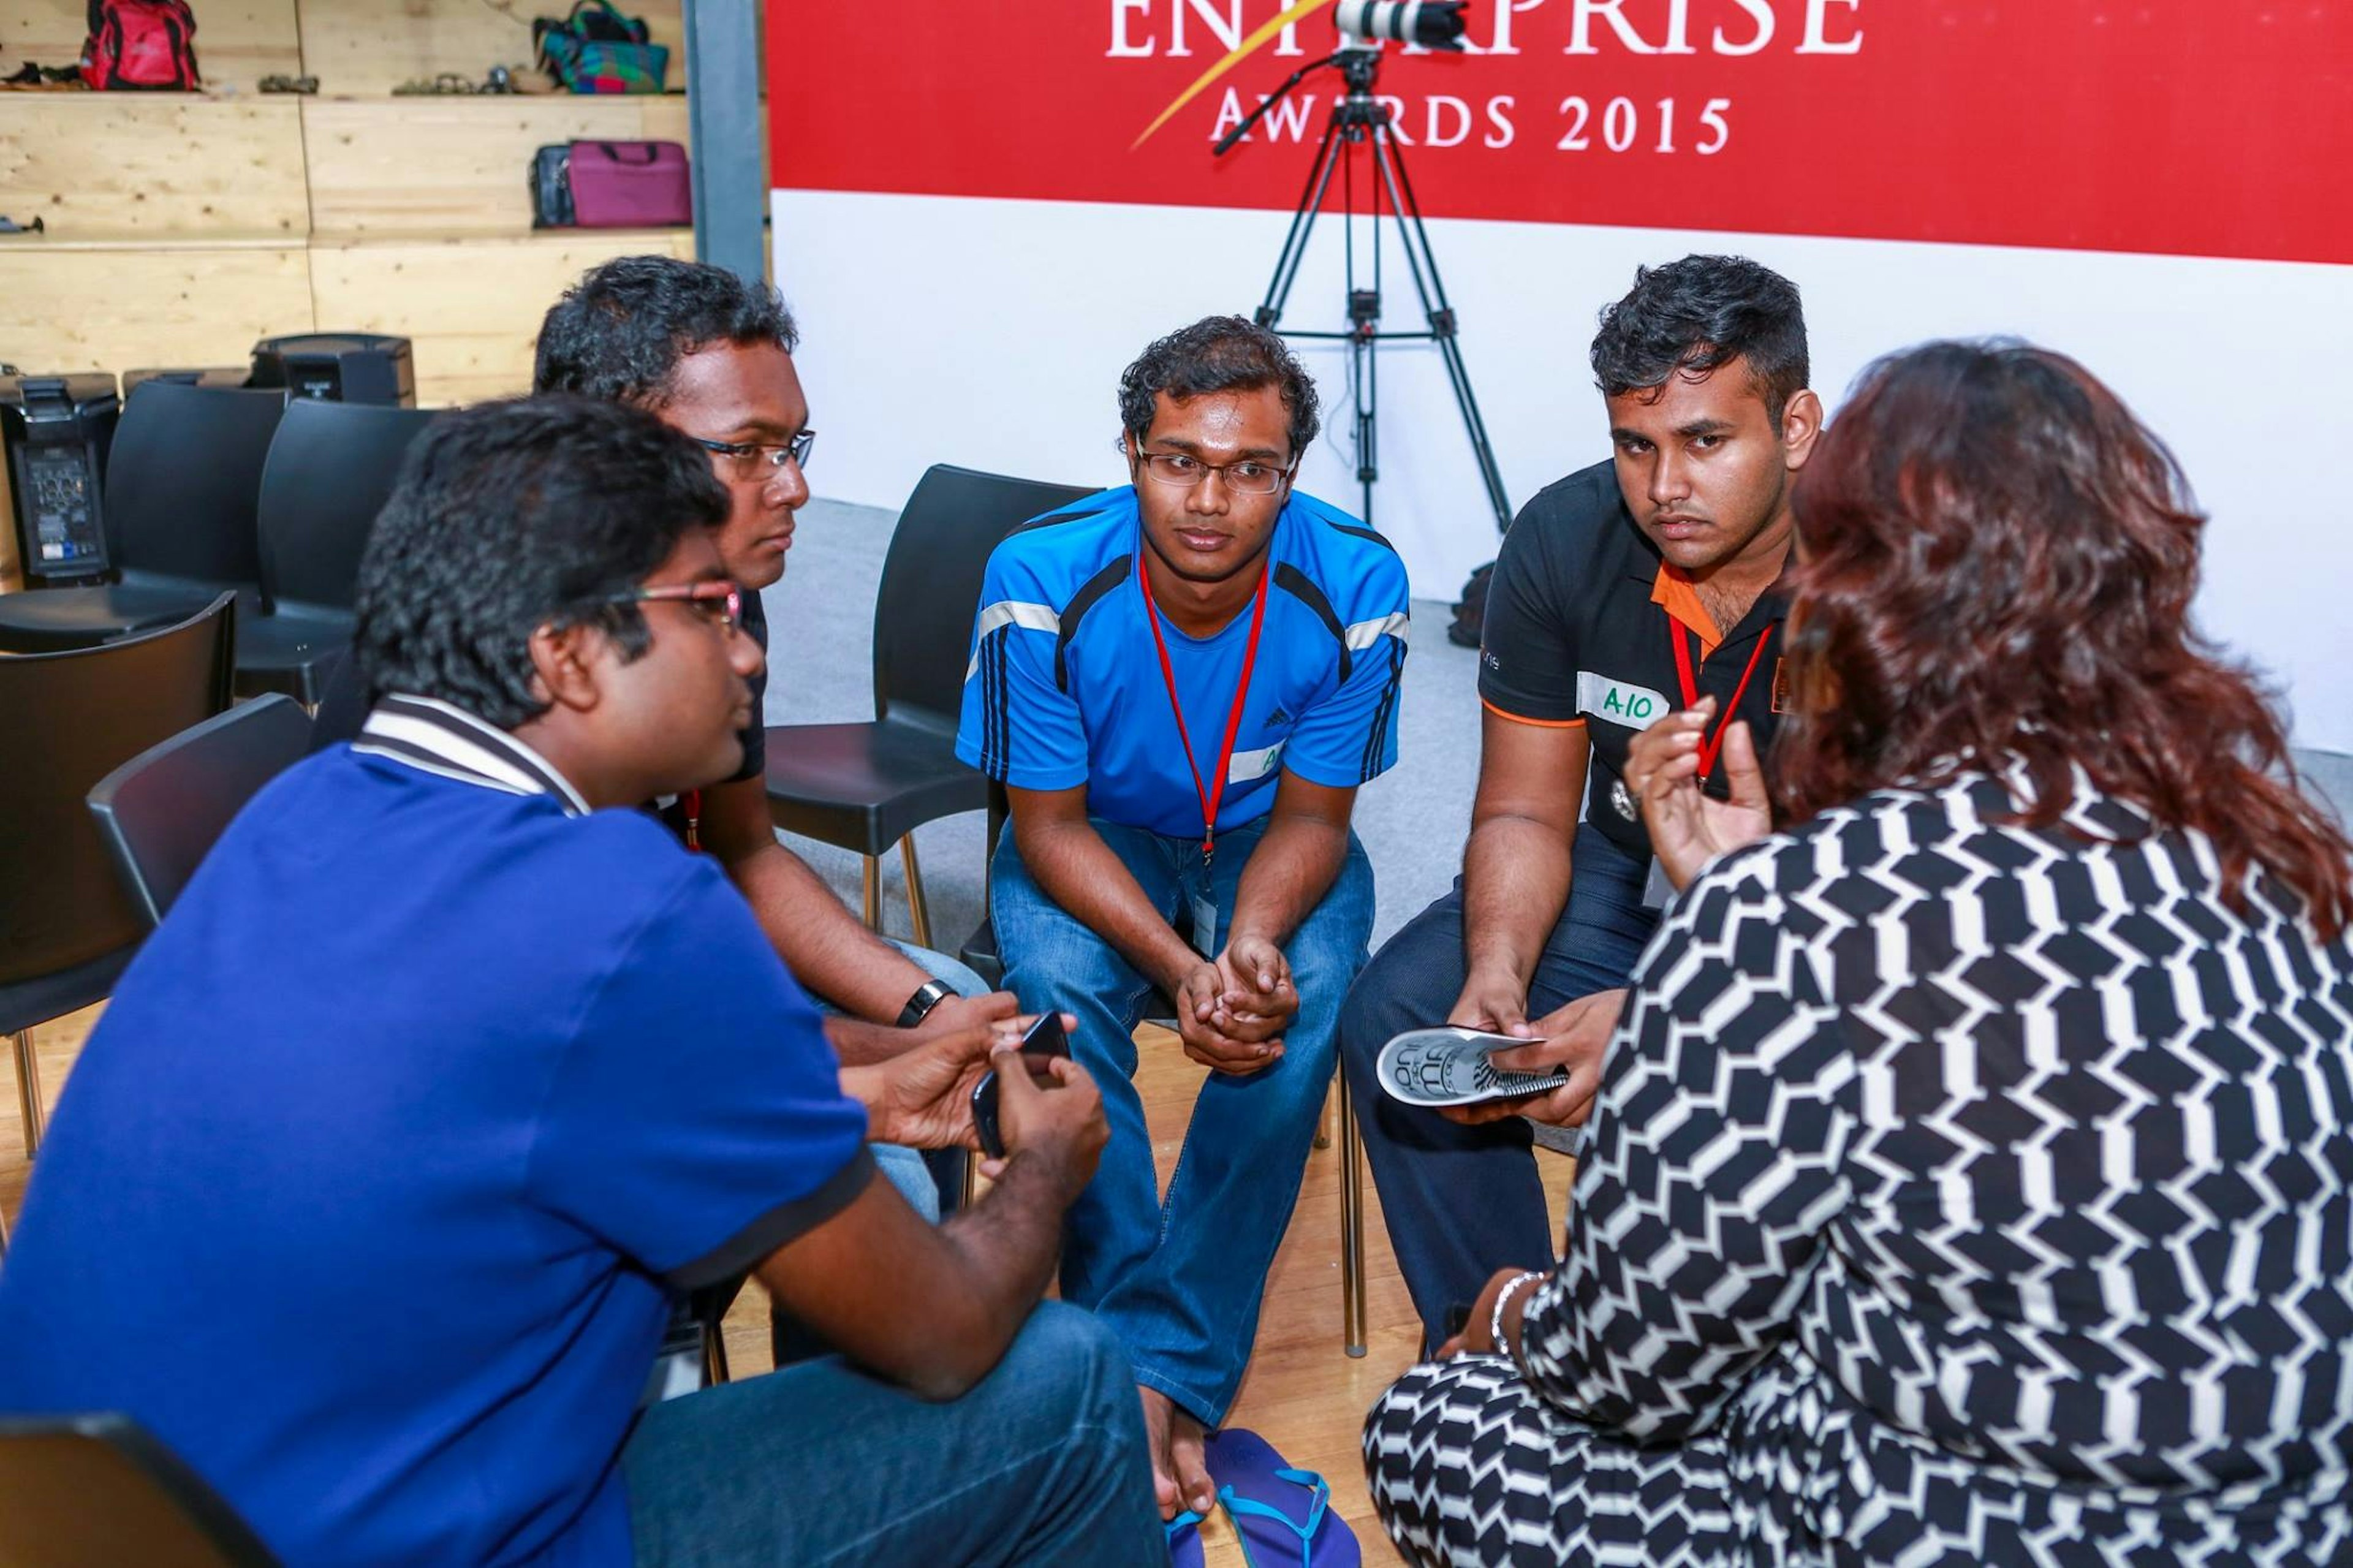 HSBC Youth Enterprise Awards 2015 Discussion